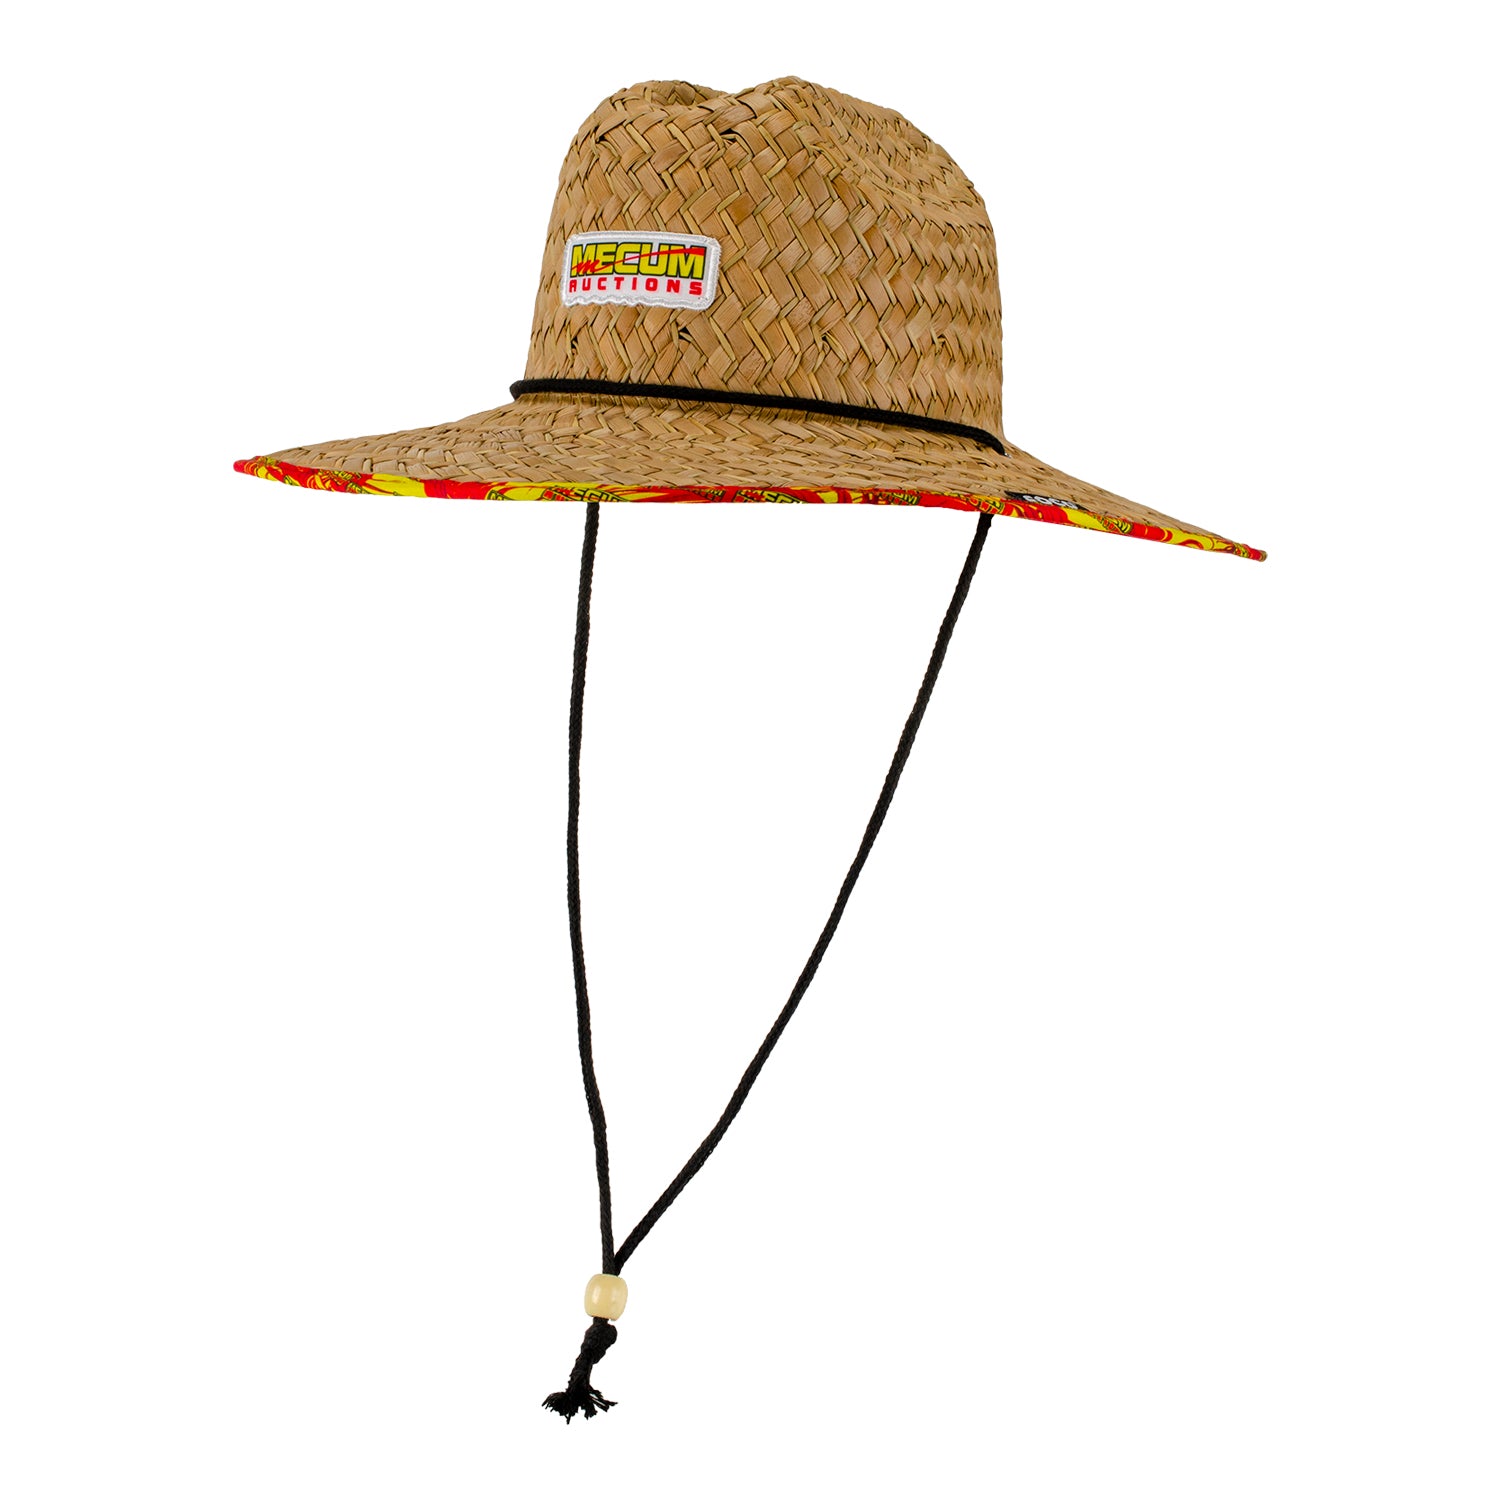 Mecum Auction Straw Hat in Brown - Angled Left Side View